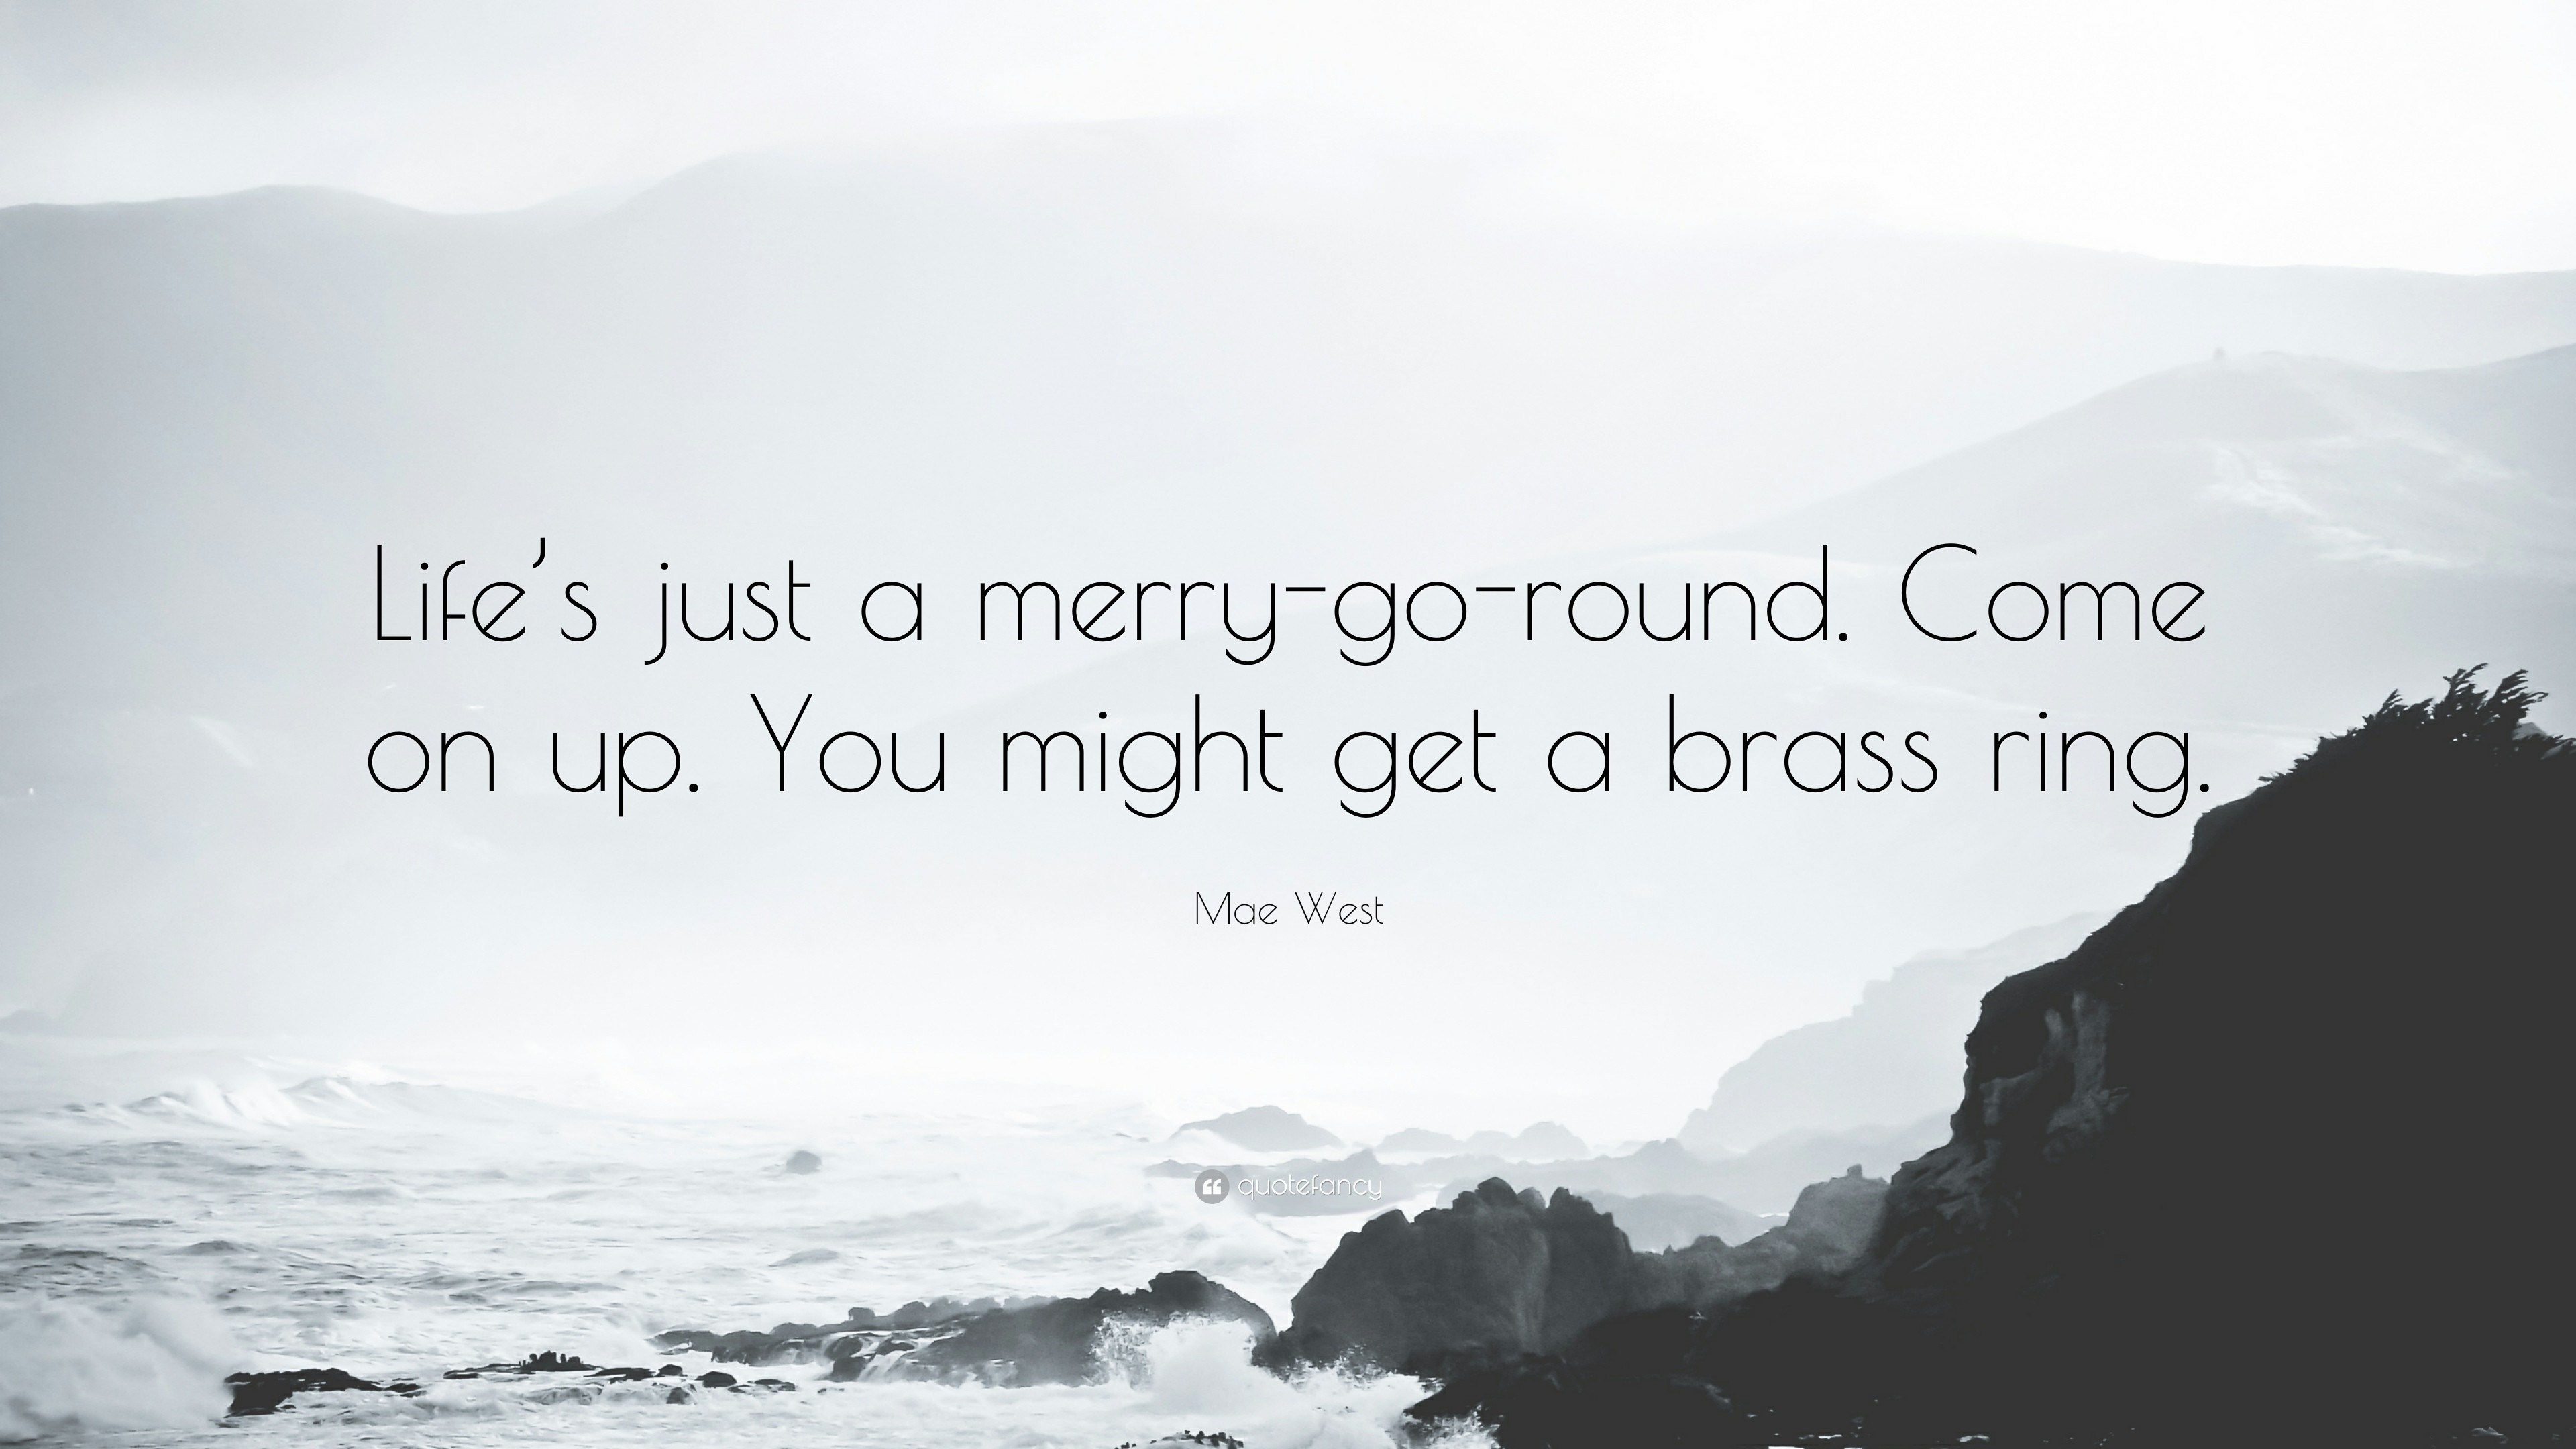 3840x2160 Mae West Quote: “Life's just a merry-go-round. Come on